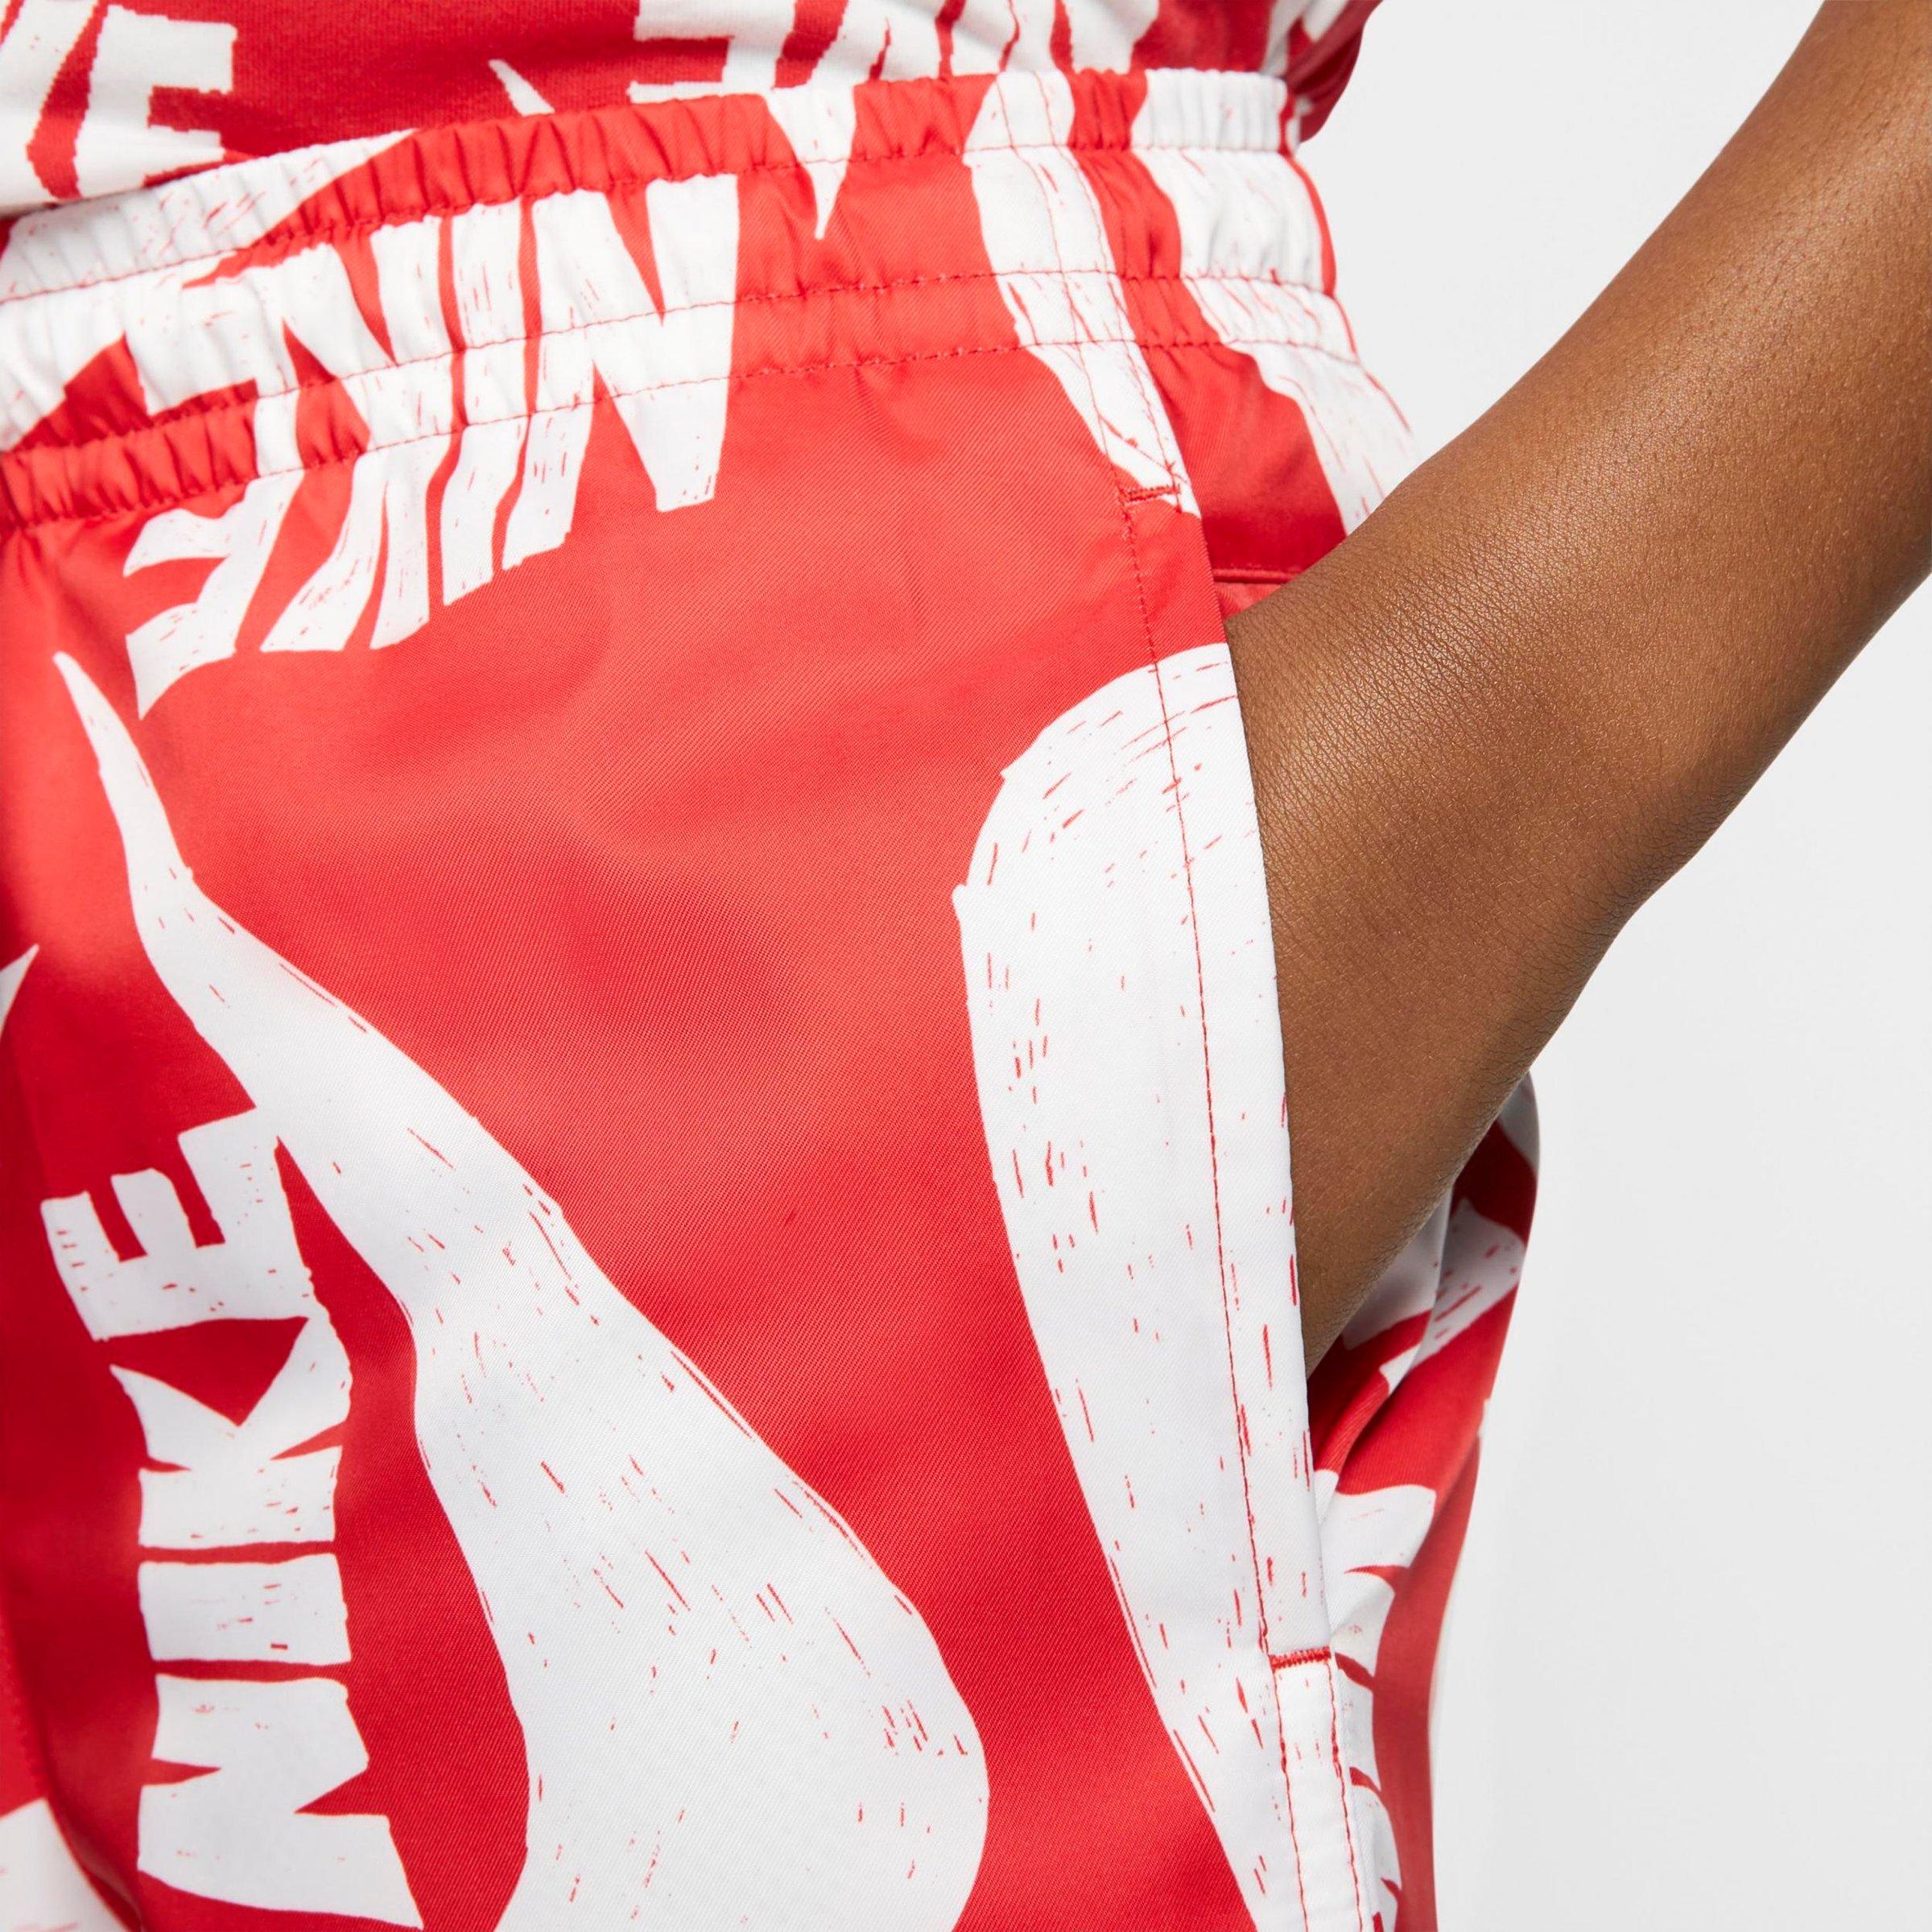 red and white nike shorts